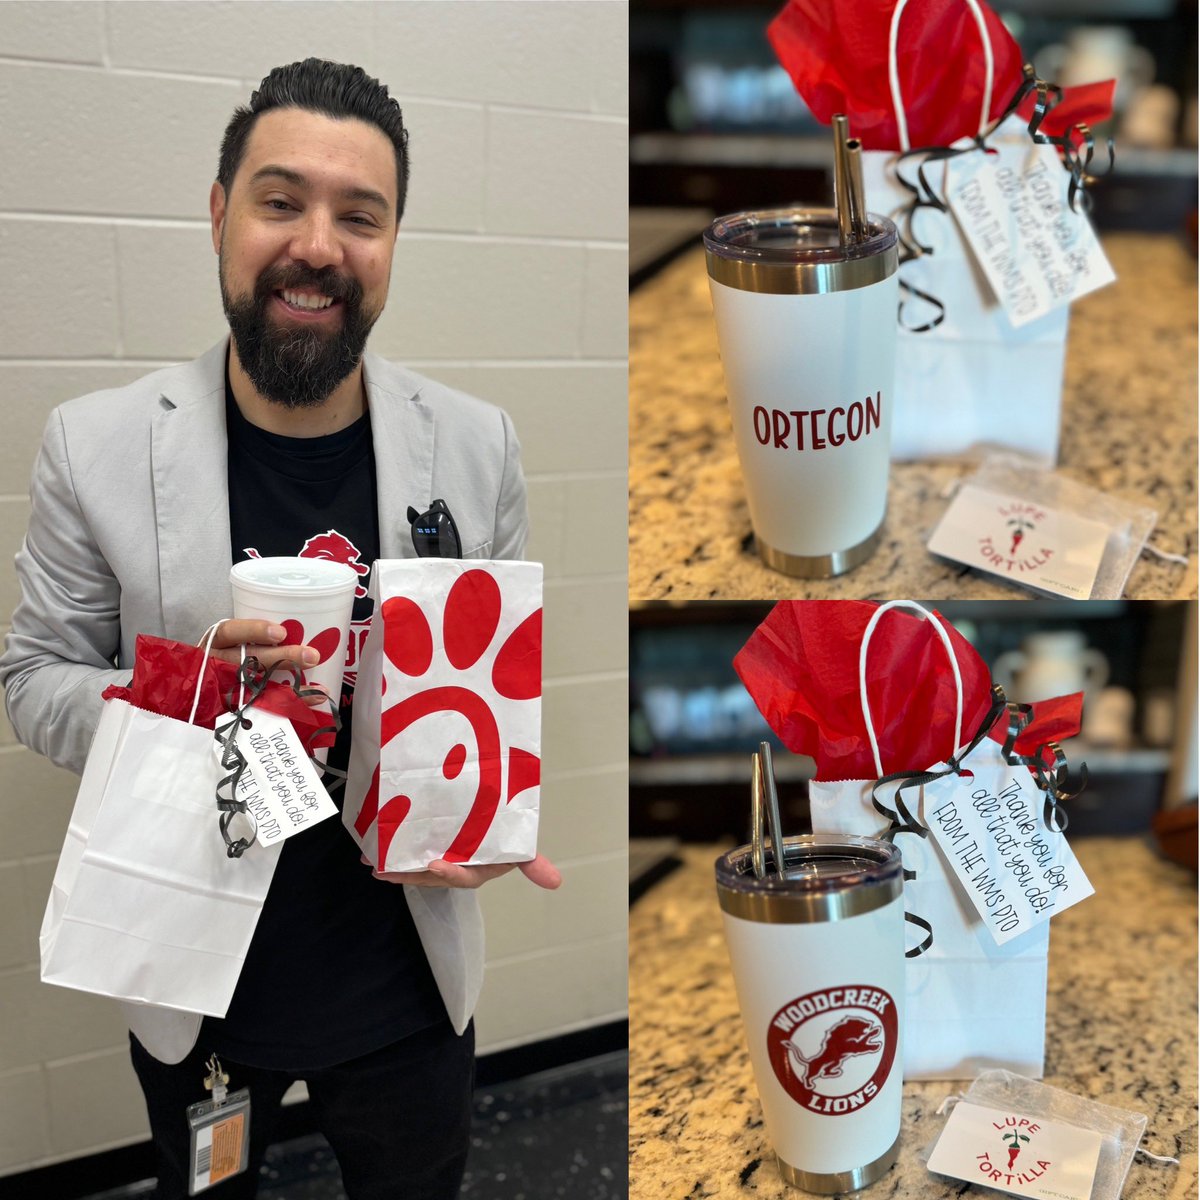 Today we celebrated #NationalSchoolLibrarianDay by showering this guy👇 with a few tokens of appreciation. Mr. Ortegon, thanks for the daily passion you bring to support a culture of reading and discovery at WMS. We are grateful for you today and every day! 🙏 📚 🐾 #BeEliteWMS